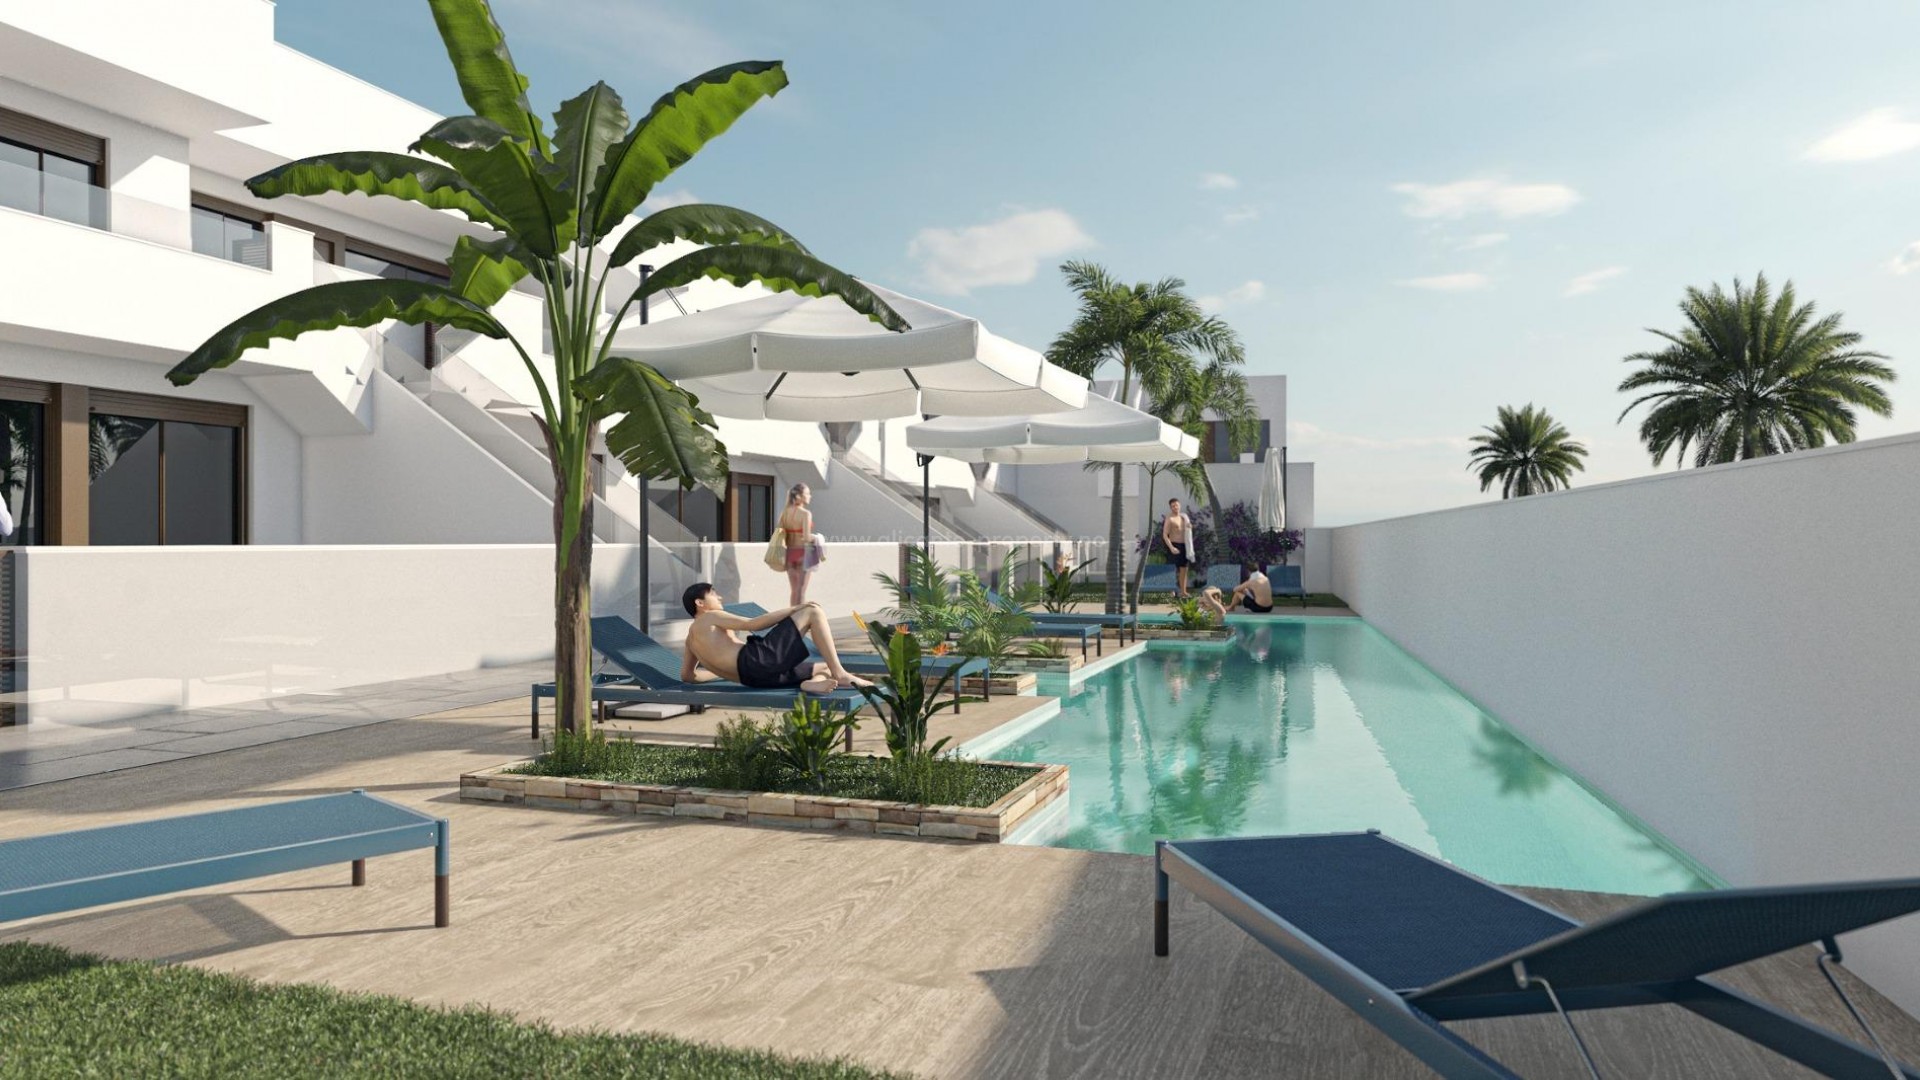 16 new bungalows and apartments in Pilar de La Horadada, 2/3 bedrooms, 2 bathrooms, communal pool, large terraces or roof terrace, private parking.